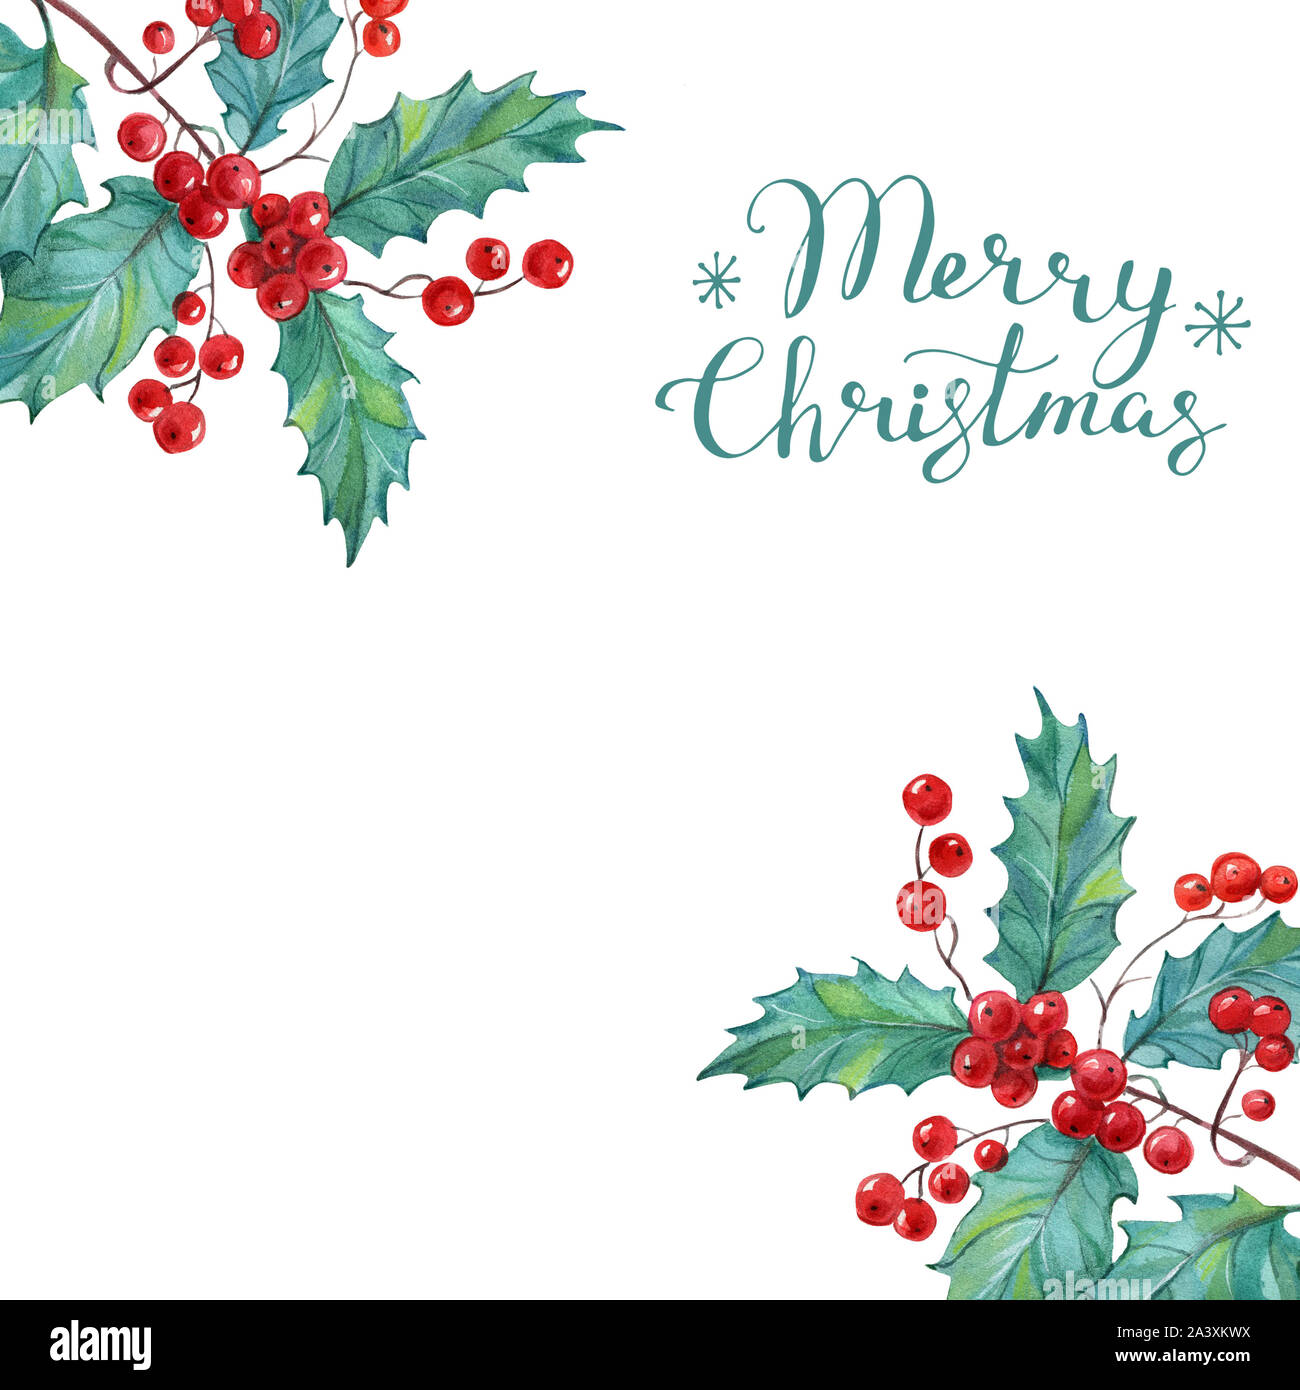 https://c8.alamy.com/comp/2A3XKWX/set-of-christmas-sprigs-of-mistletoe-sprigs-of-mistletoe-winter-holiday-theme-suitable-for-postcards-posters-web-pages-and-textiles-2A3XKWX.jpg